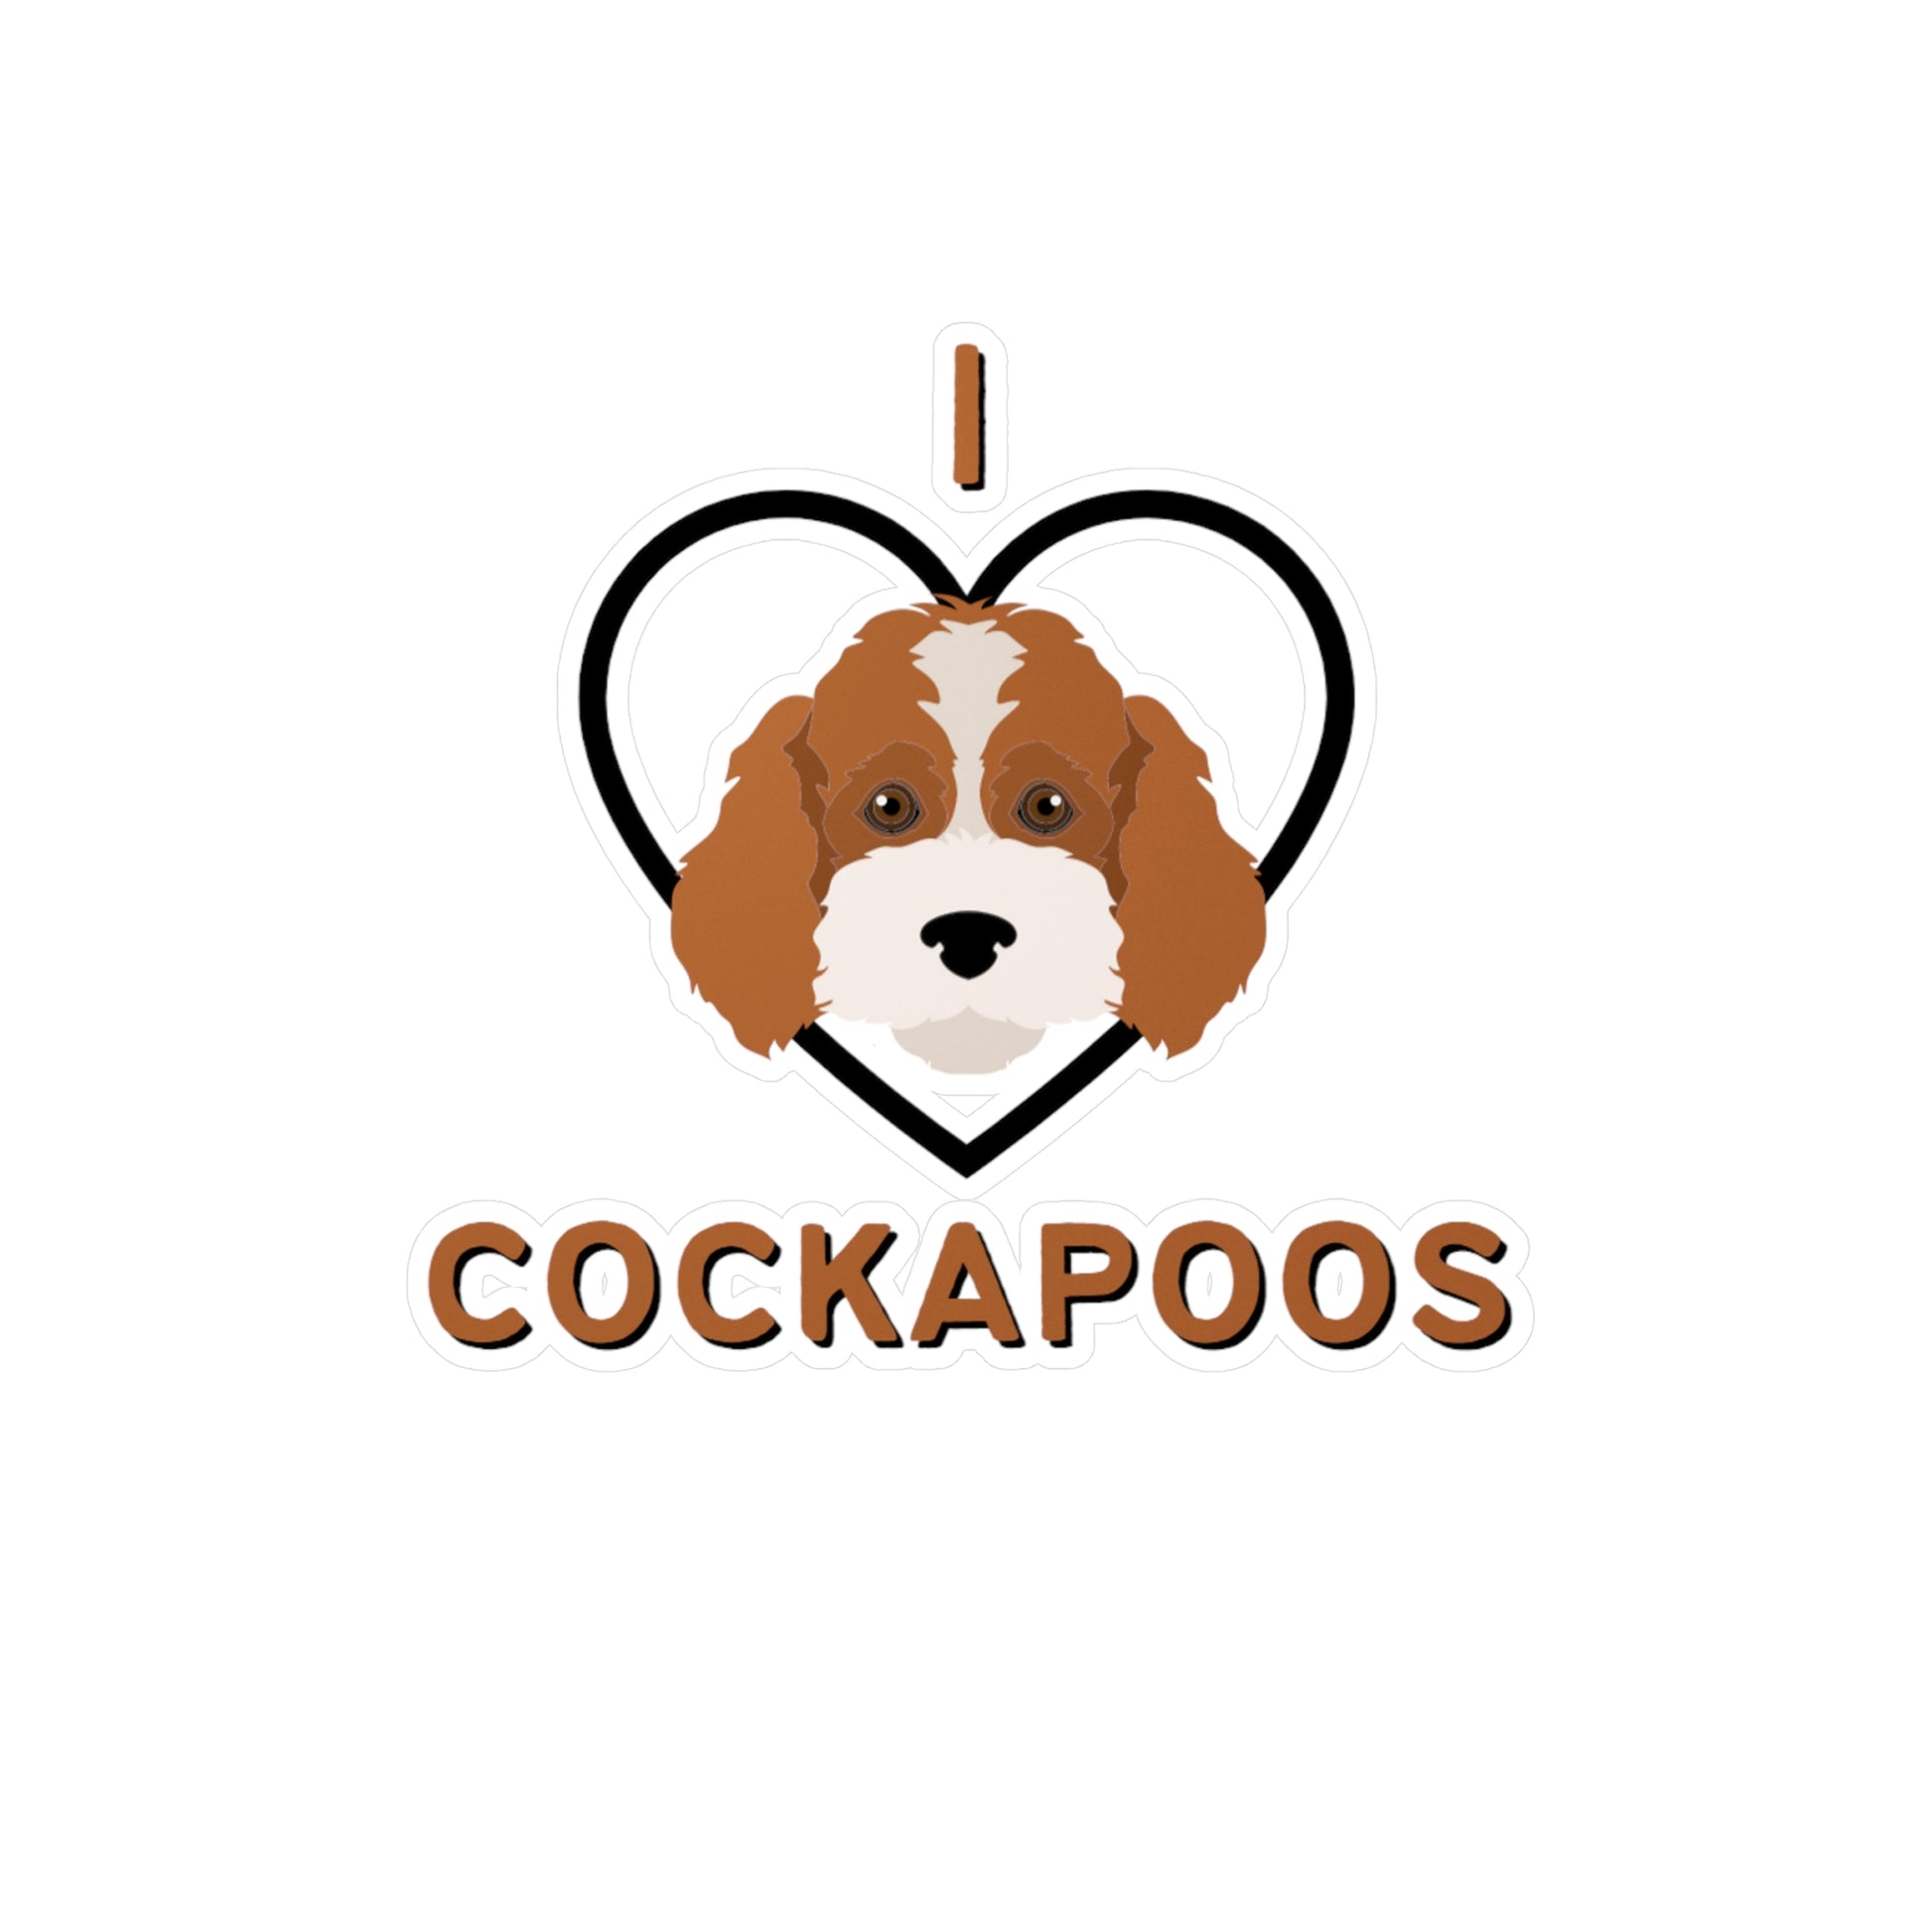 "I Love Cockapoos" Vinyl Decals - Weave Got Gifts - Unique Gifts You Won’t Find Anywhere Else!